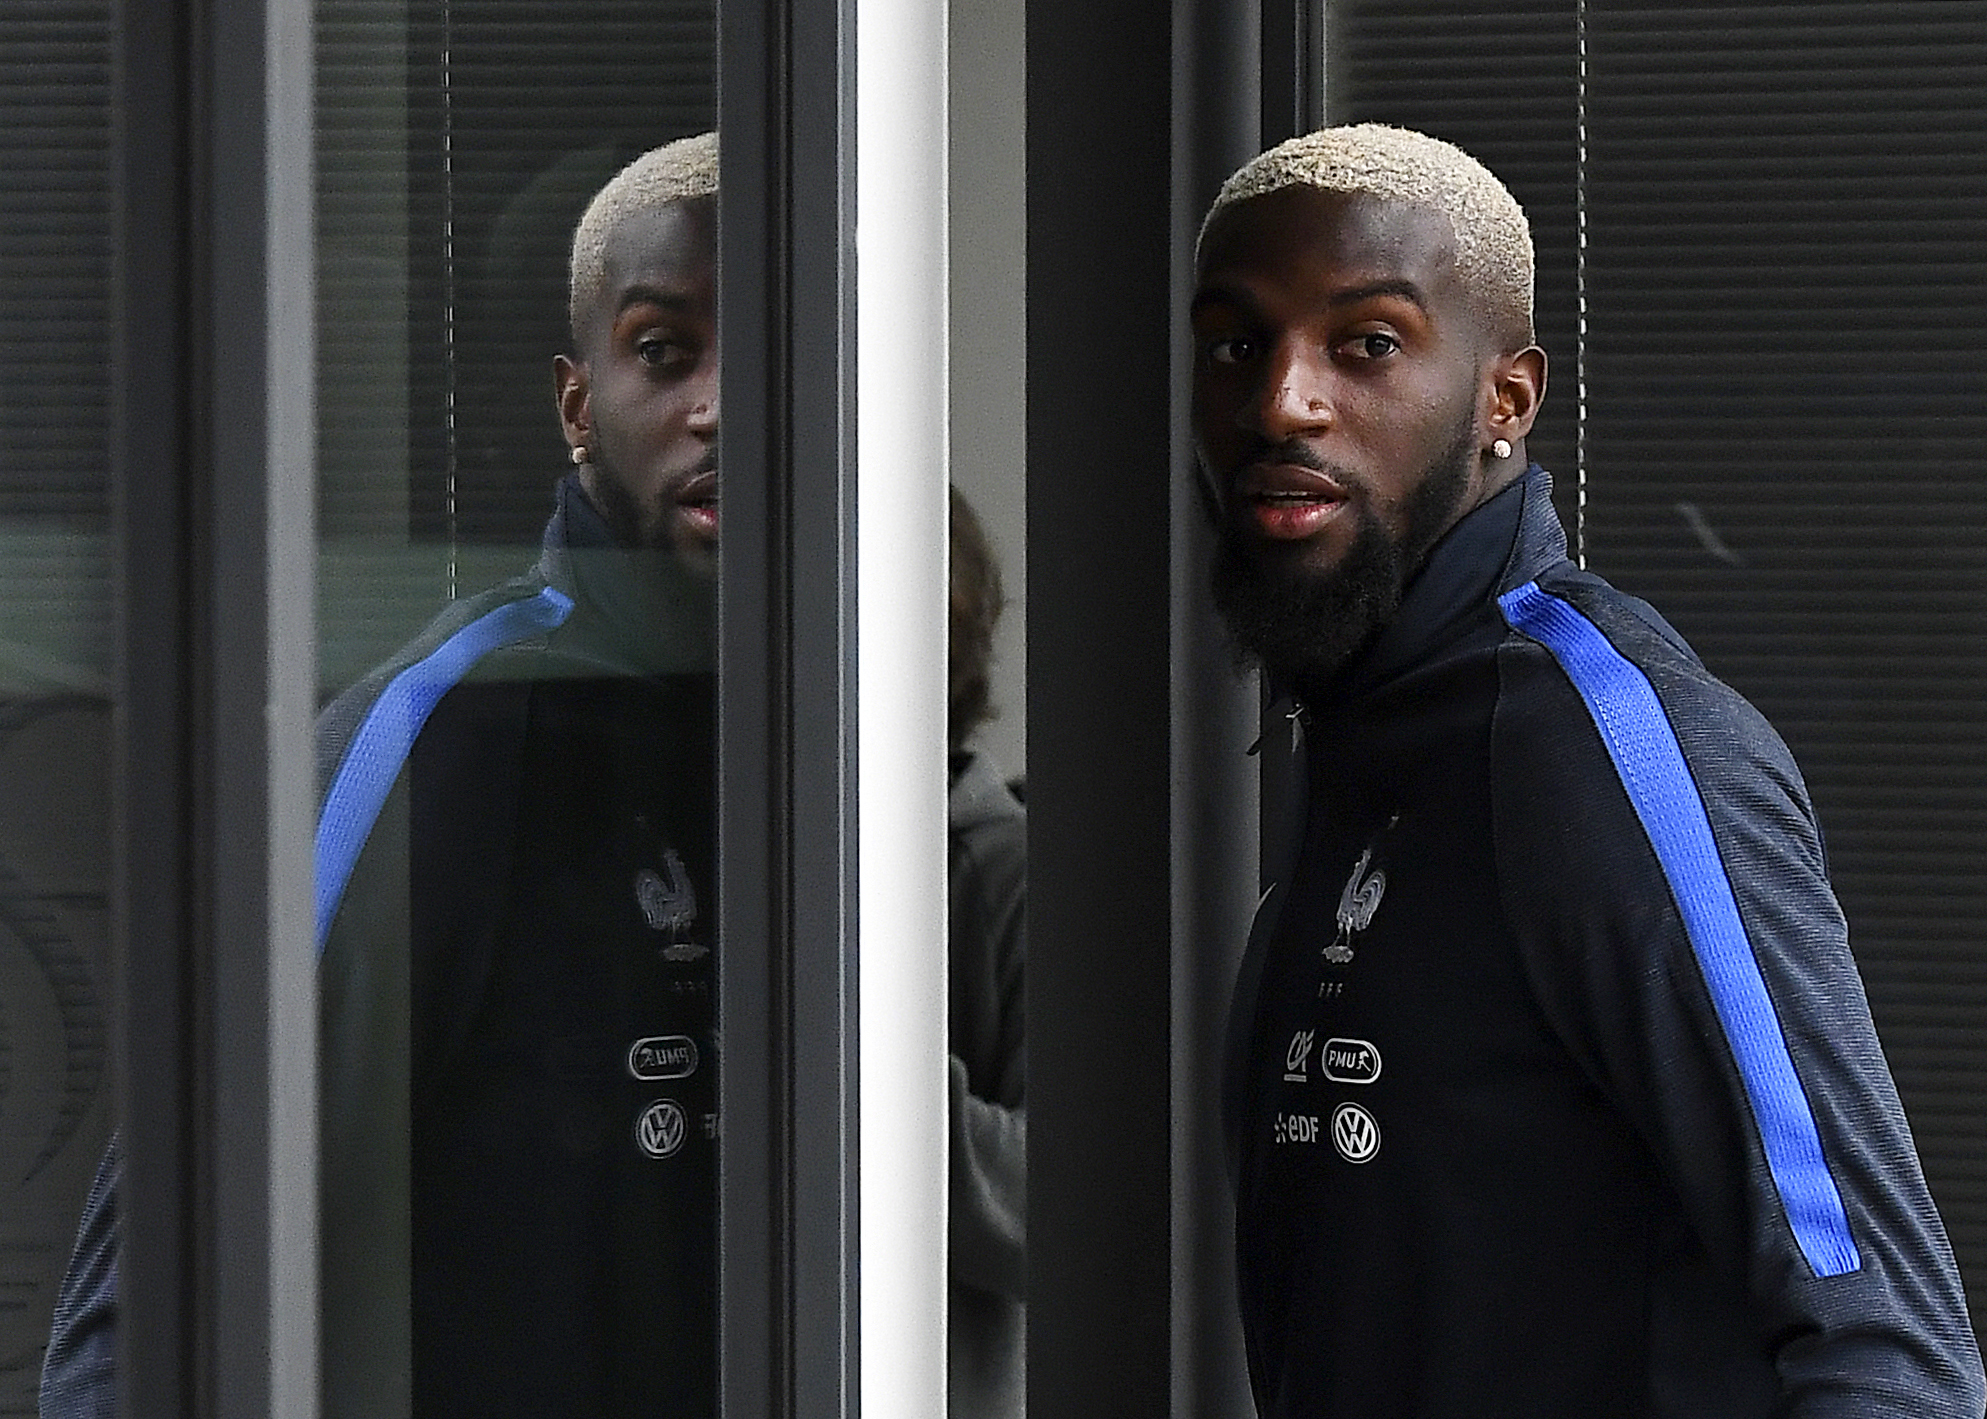 France's midfielder Tiemoue Bakayoko arrives for a press conference in Clairefontaine, near Paris, on March 20, 2017, as part of the team's preparation for the upcoming World Cup 2018 qualifiers.  / AFP PHOTO / FRANCK FIFE        (Photo credit should read FRANCK FIFE/AFP/Getty Images)